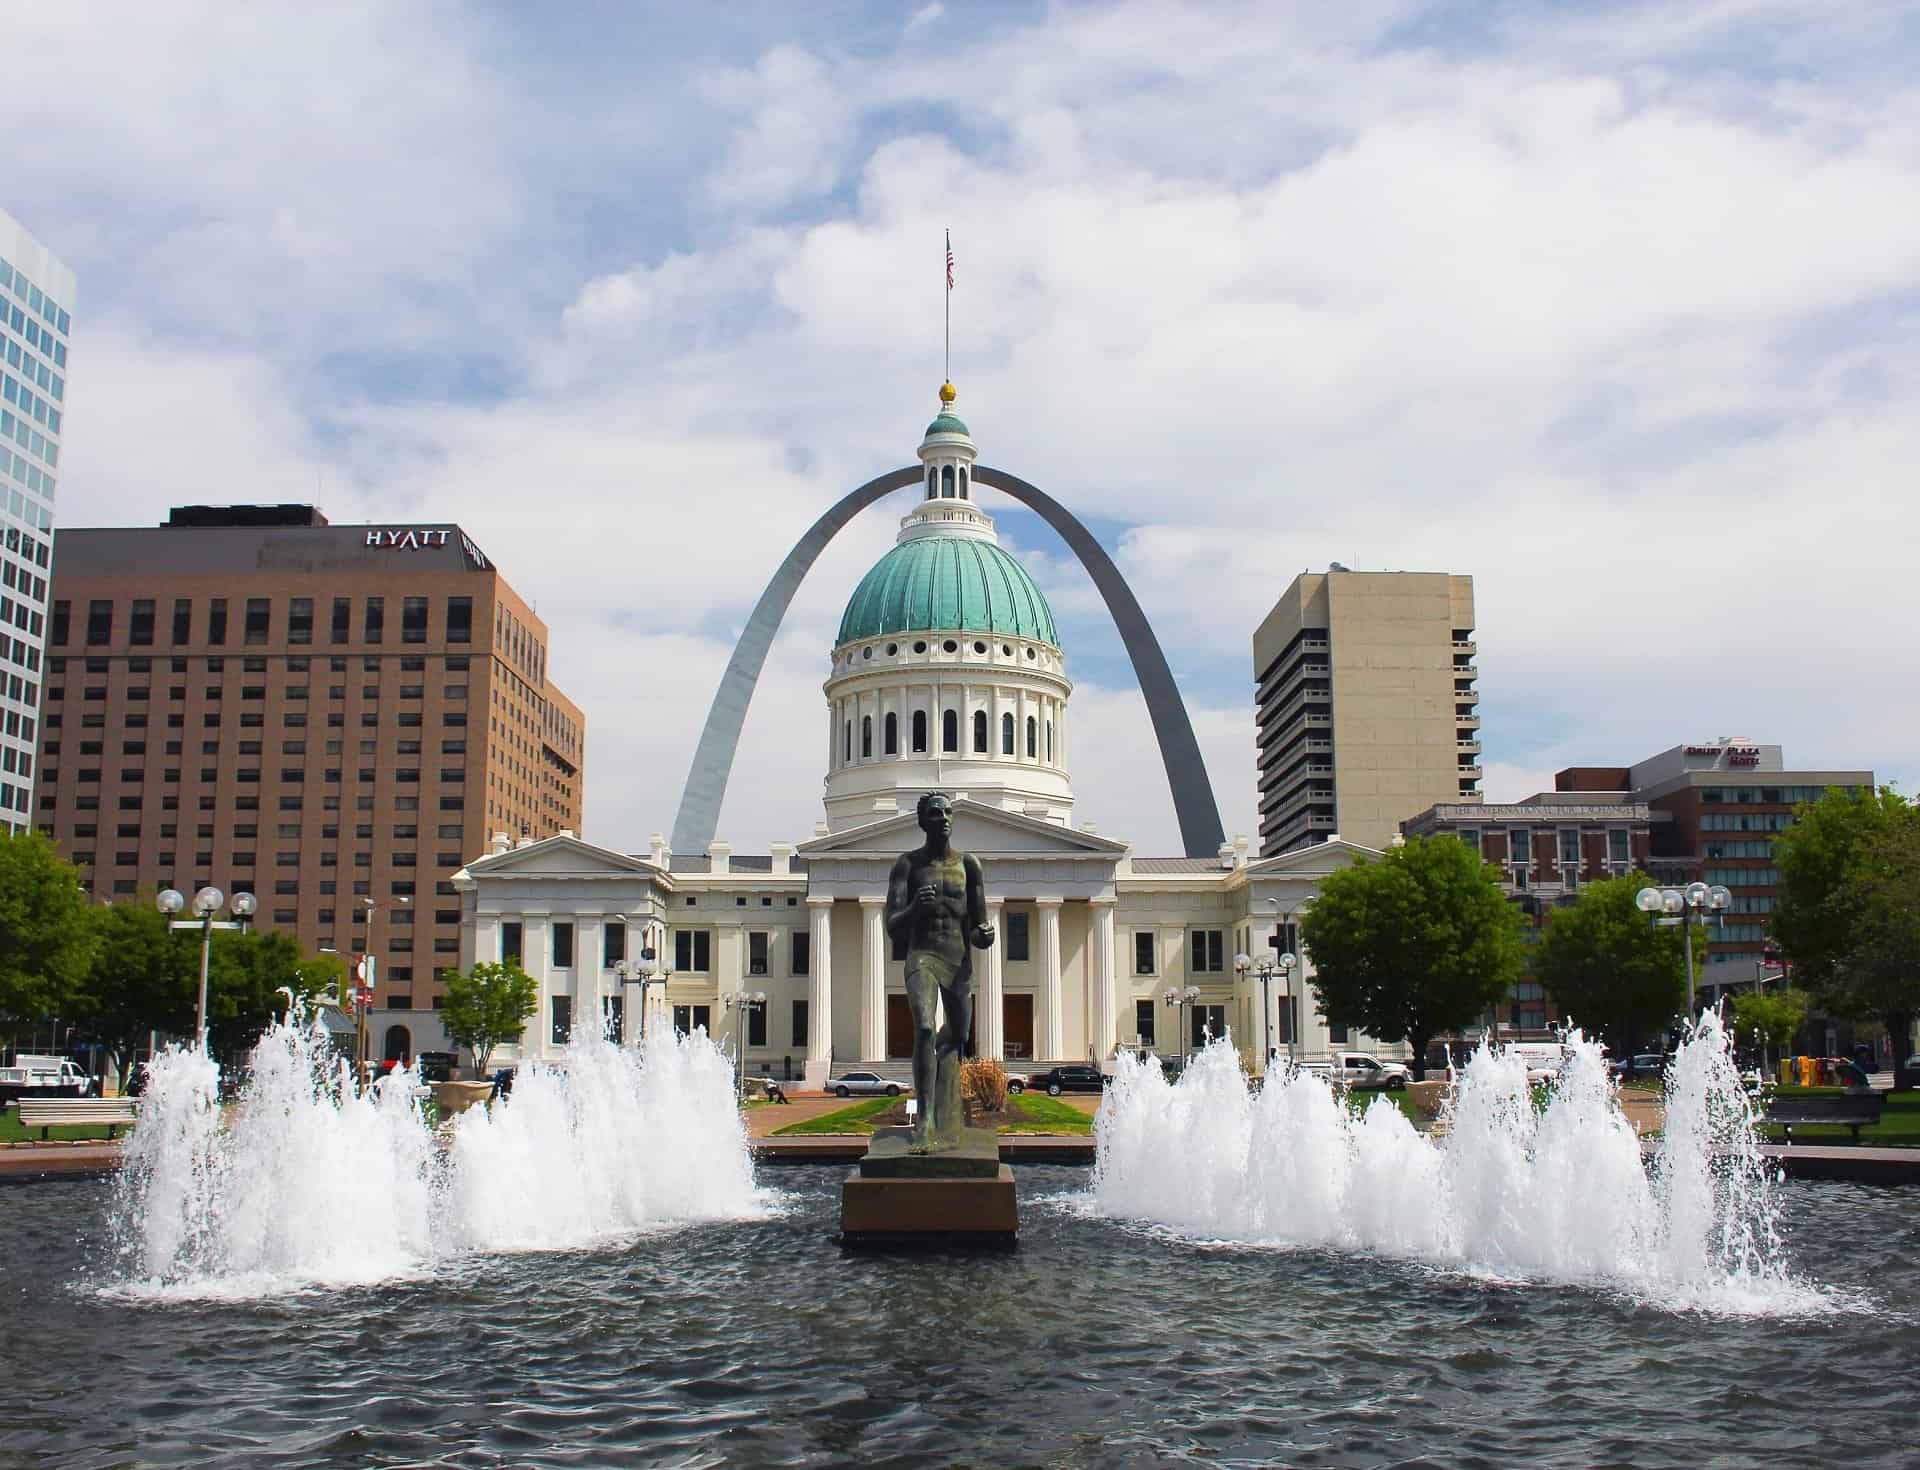 Best things to do in St Louis Missouri Dea Hoover Gateway Arch Kiener Plaza and Old Courthouse courtesy of skeeze on Pixabay